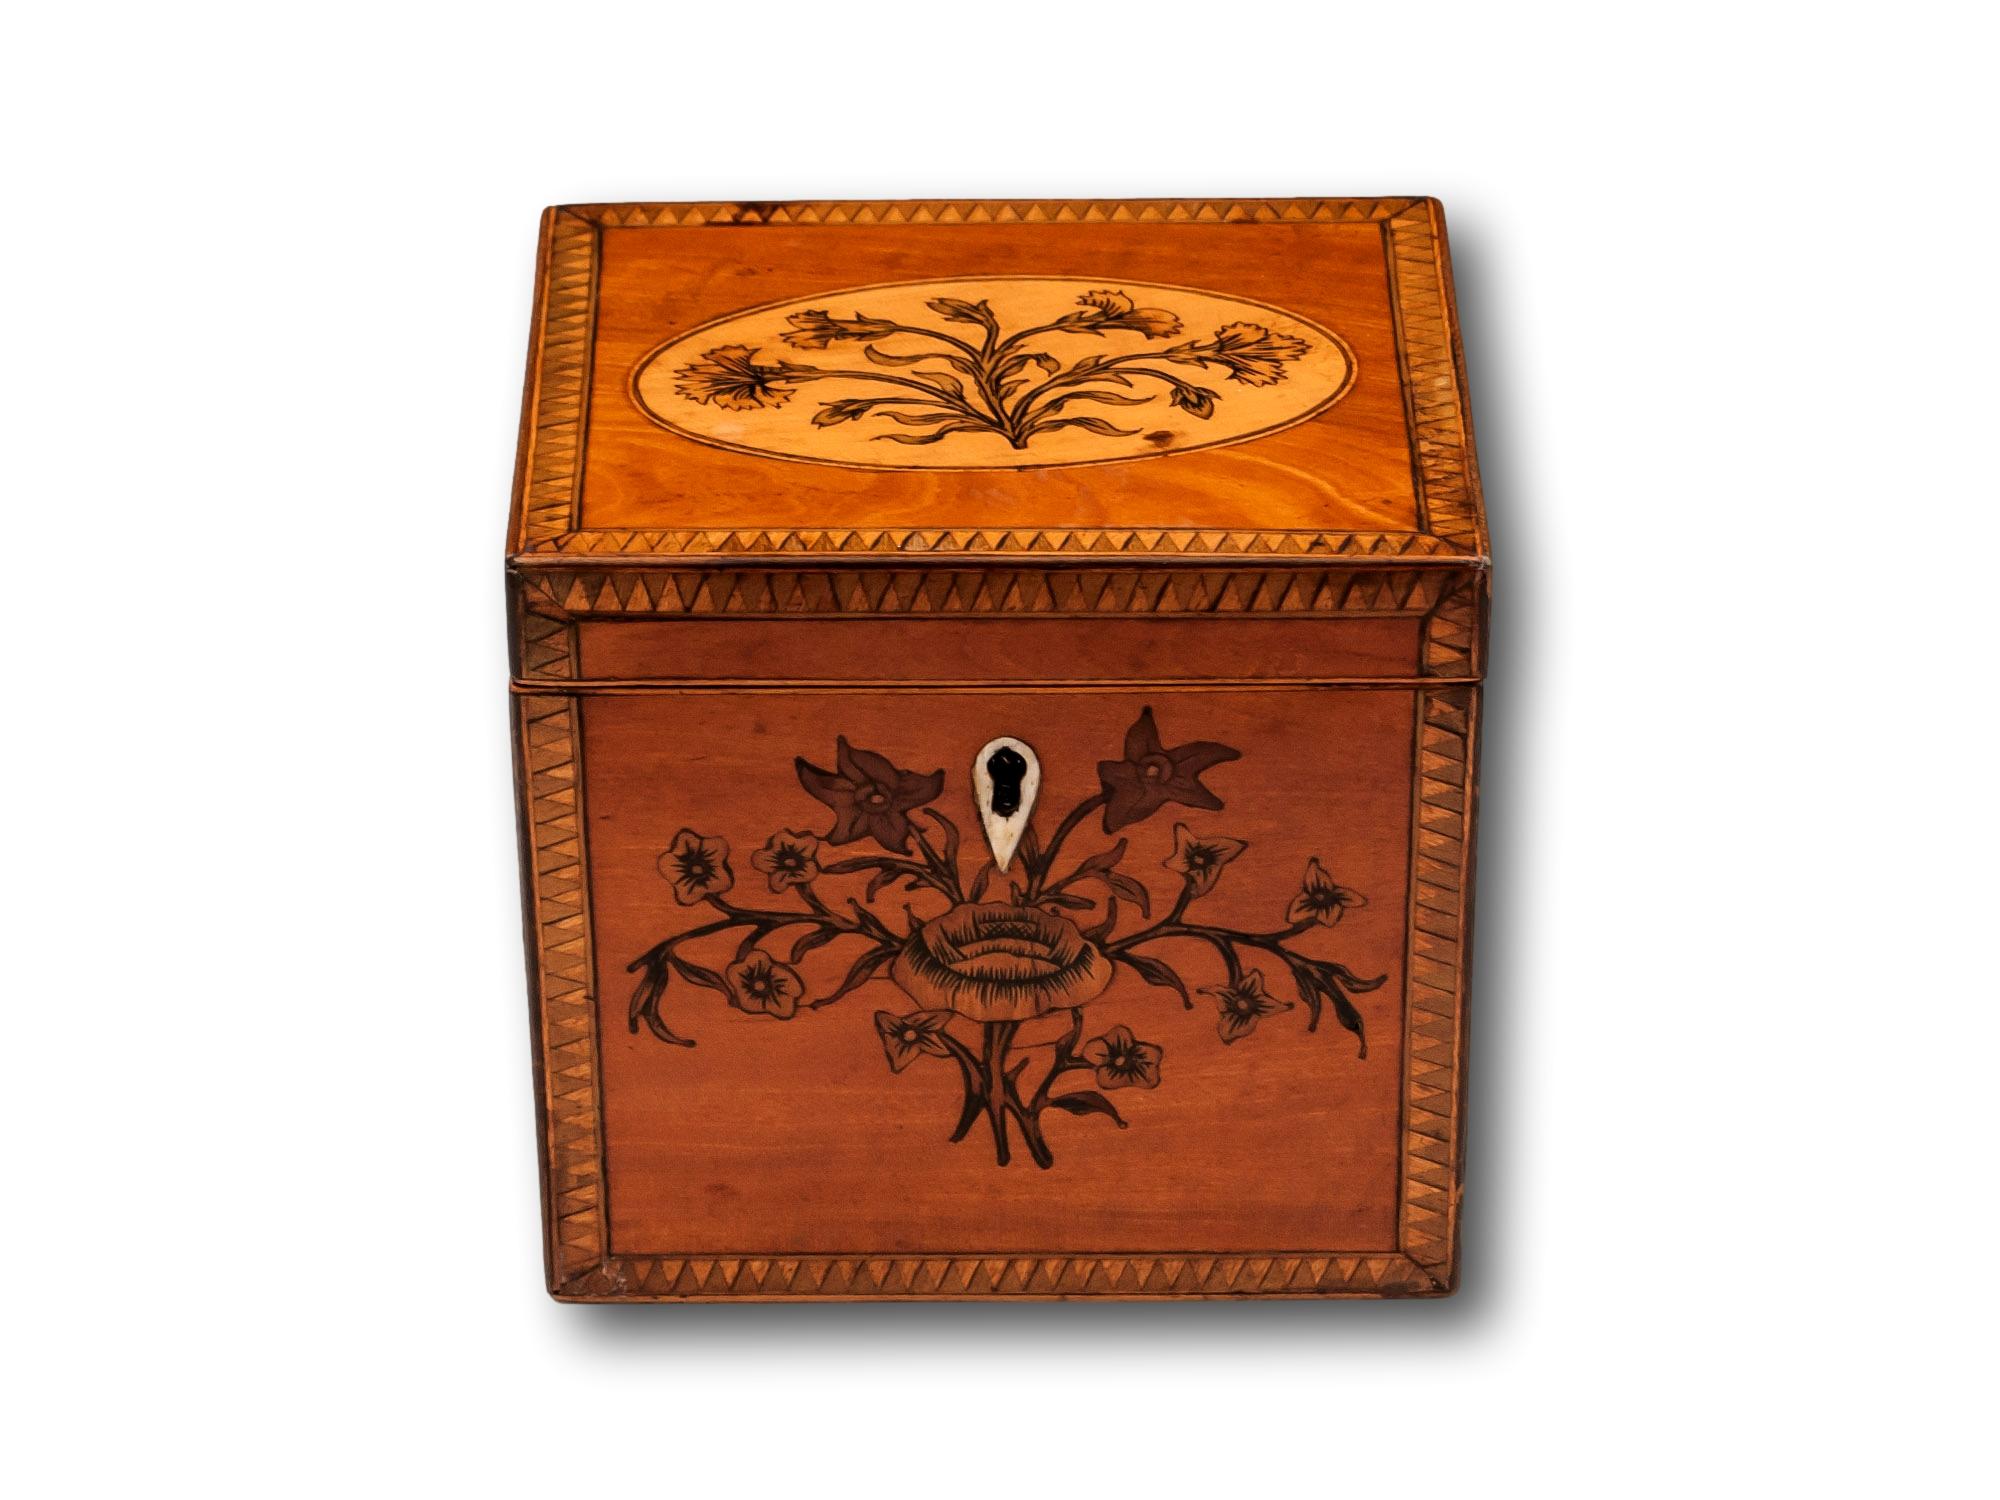 With Floral Inlays & Geometric Borders

From our Tea Caddy collection, we are delighted to offer this Satinwood Tea Caddy. The Caddy of square box form with a Satinwood exterior featuring dog tooth banding to the border of the lid and front, a